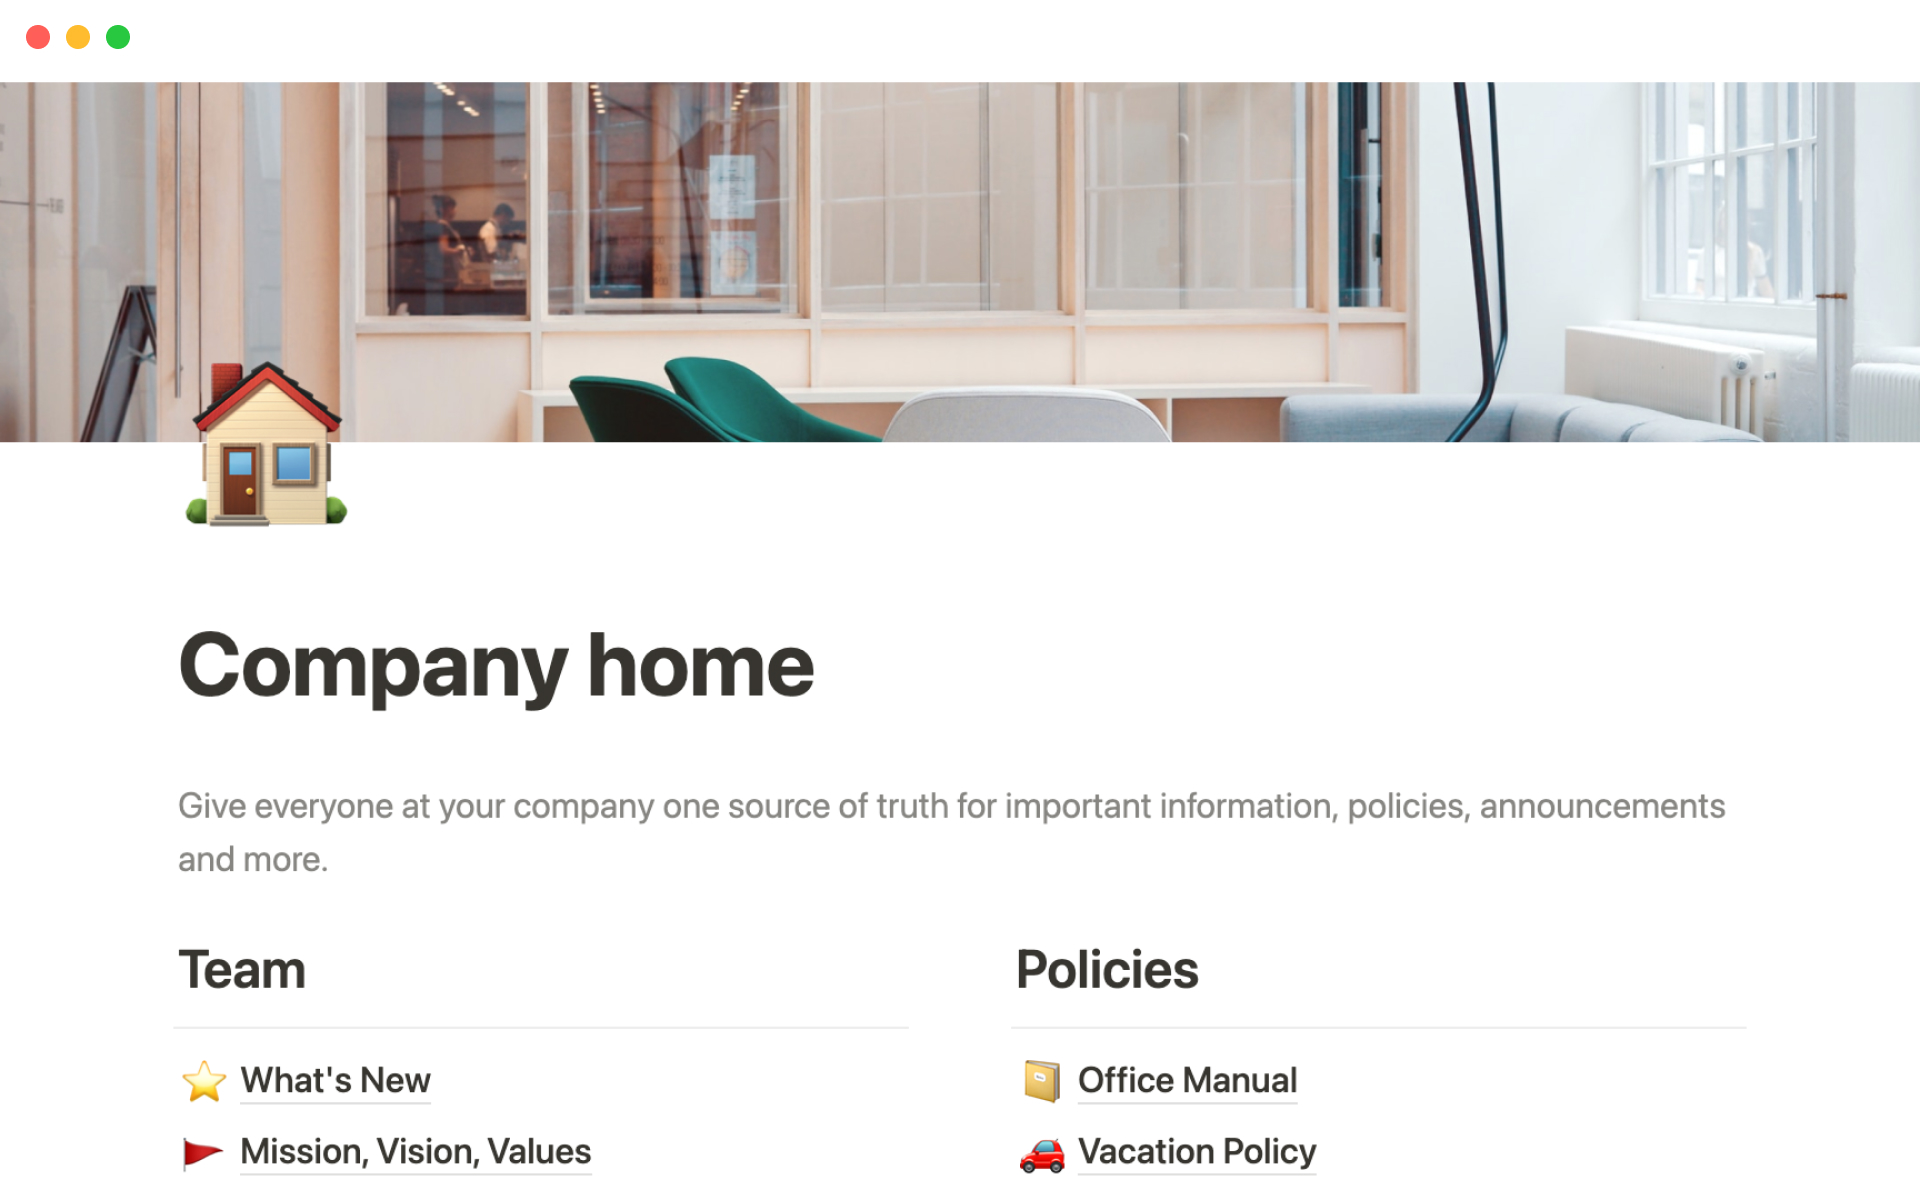 The desktop image for the Company home template